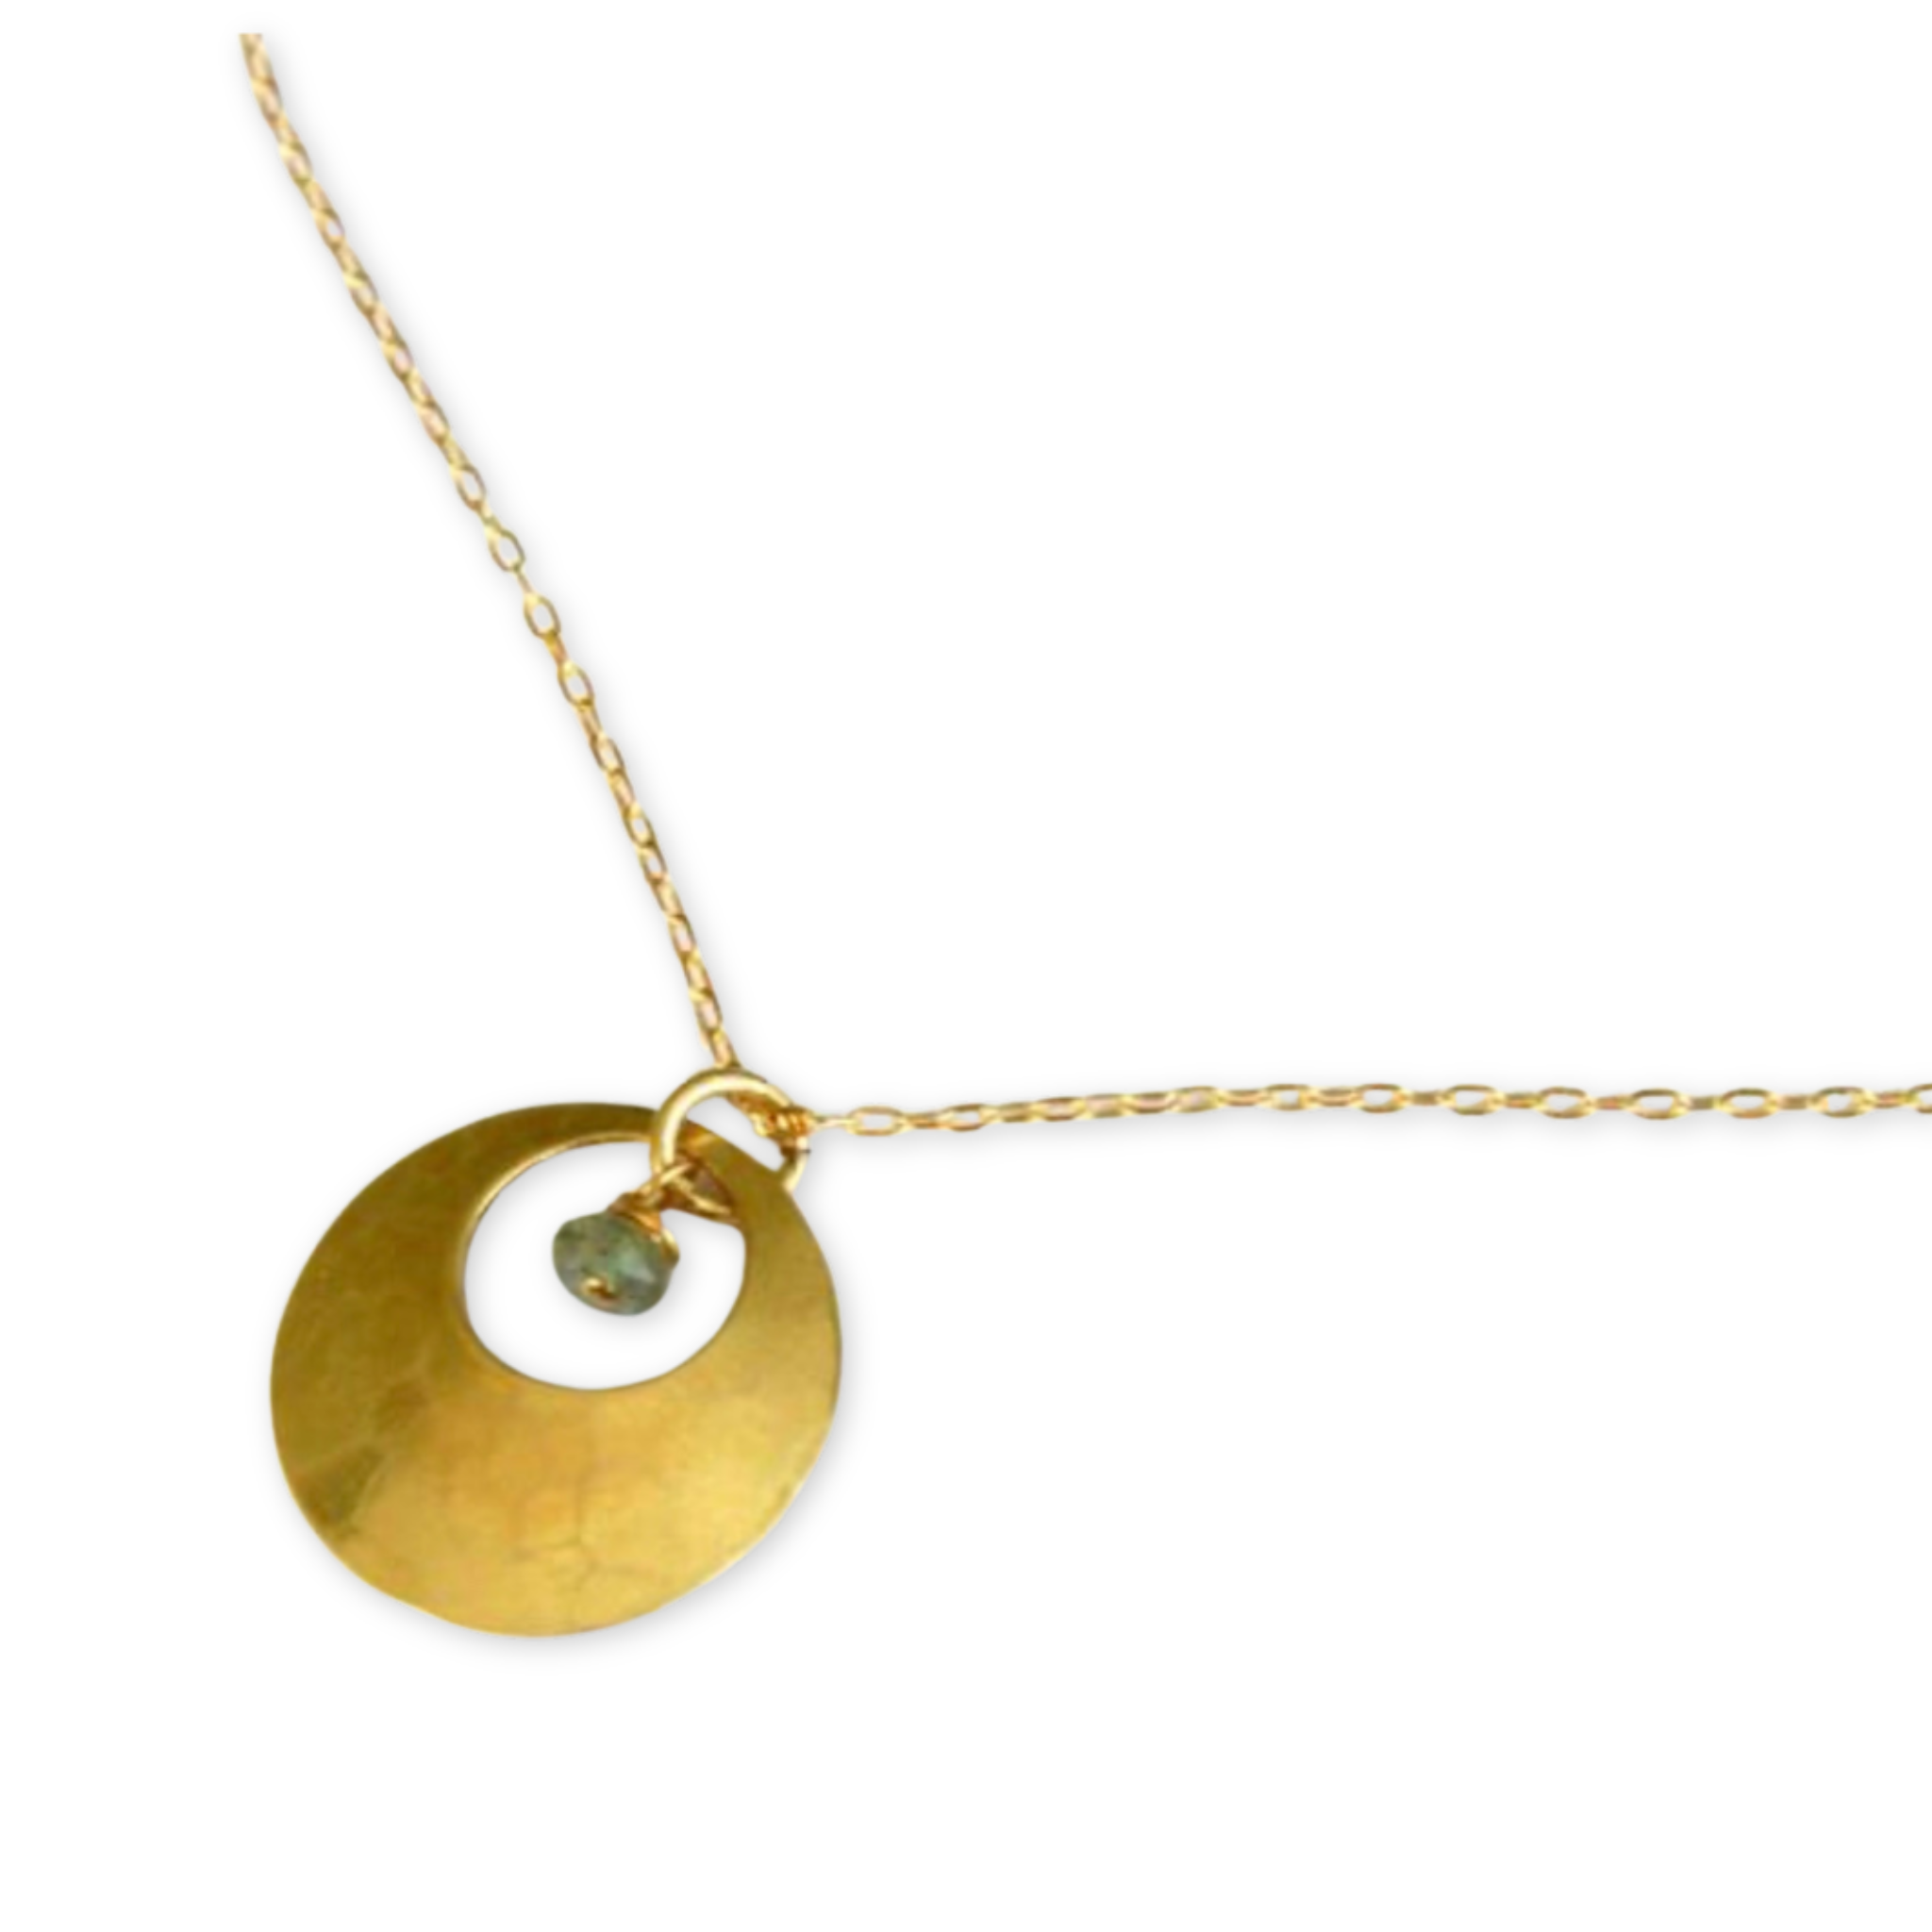 necklace with a hammered disc pendant with a cutout and a labradorite stone on a simple chain